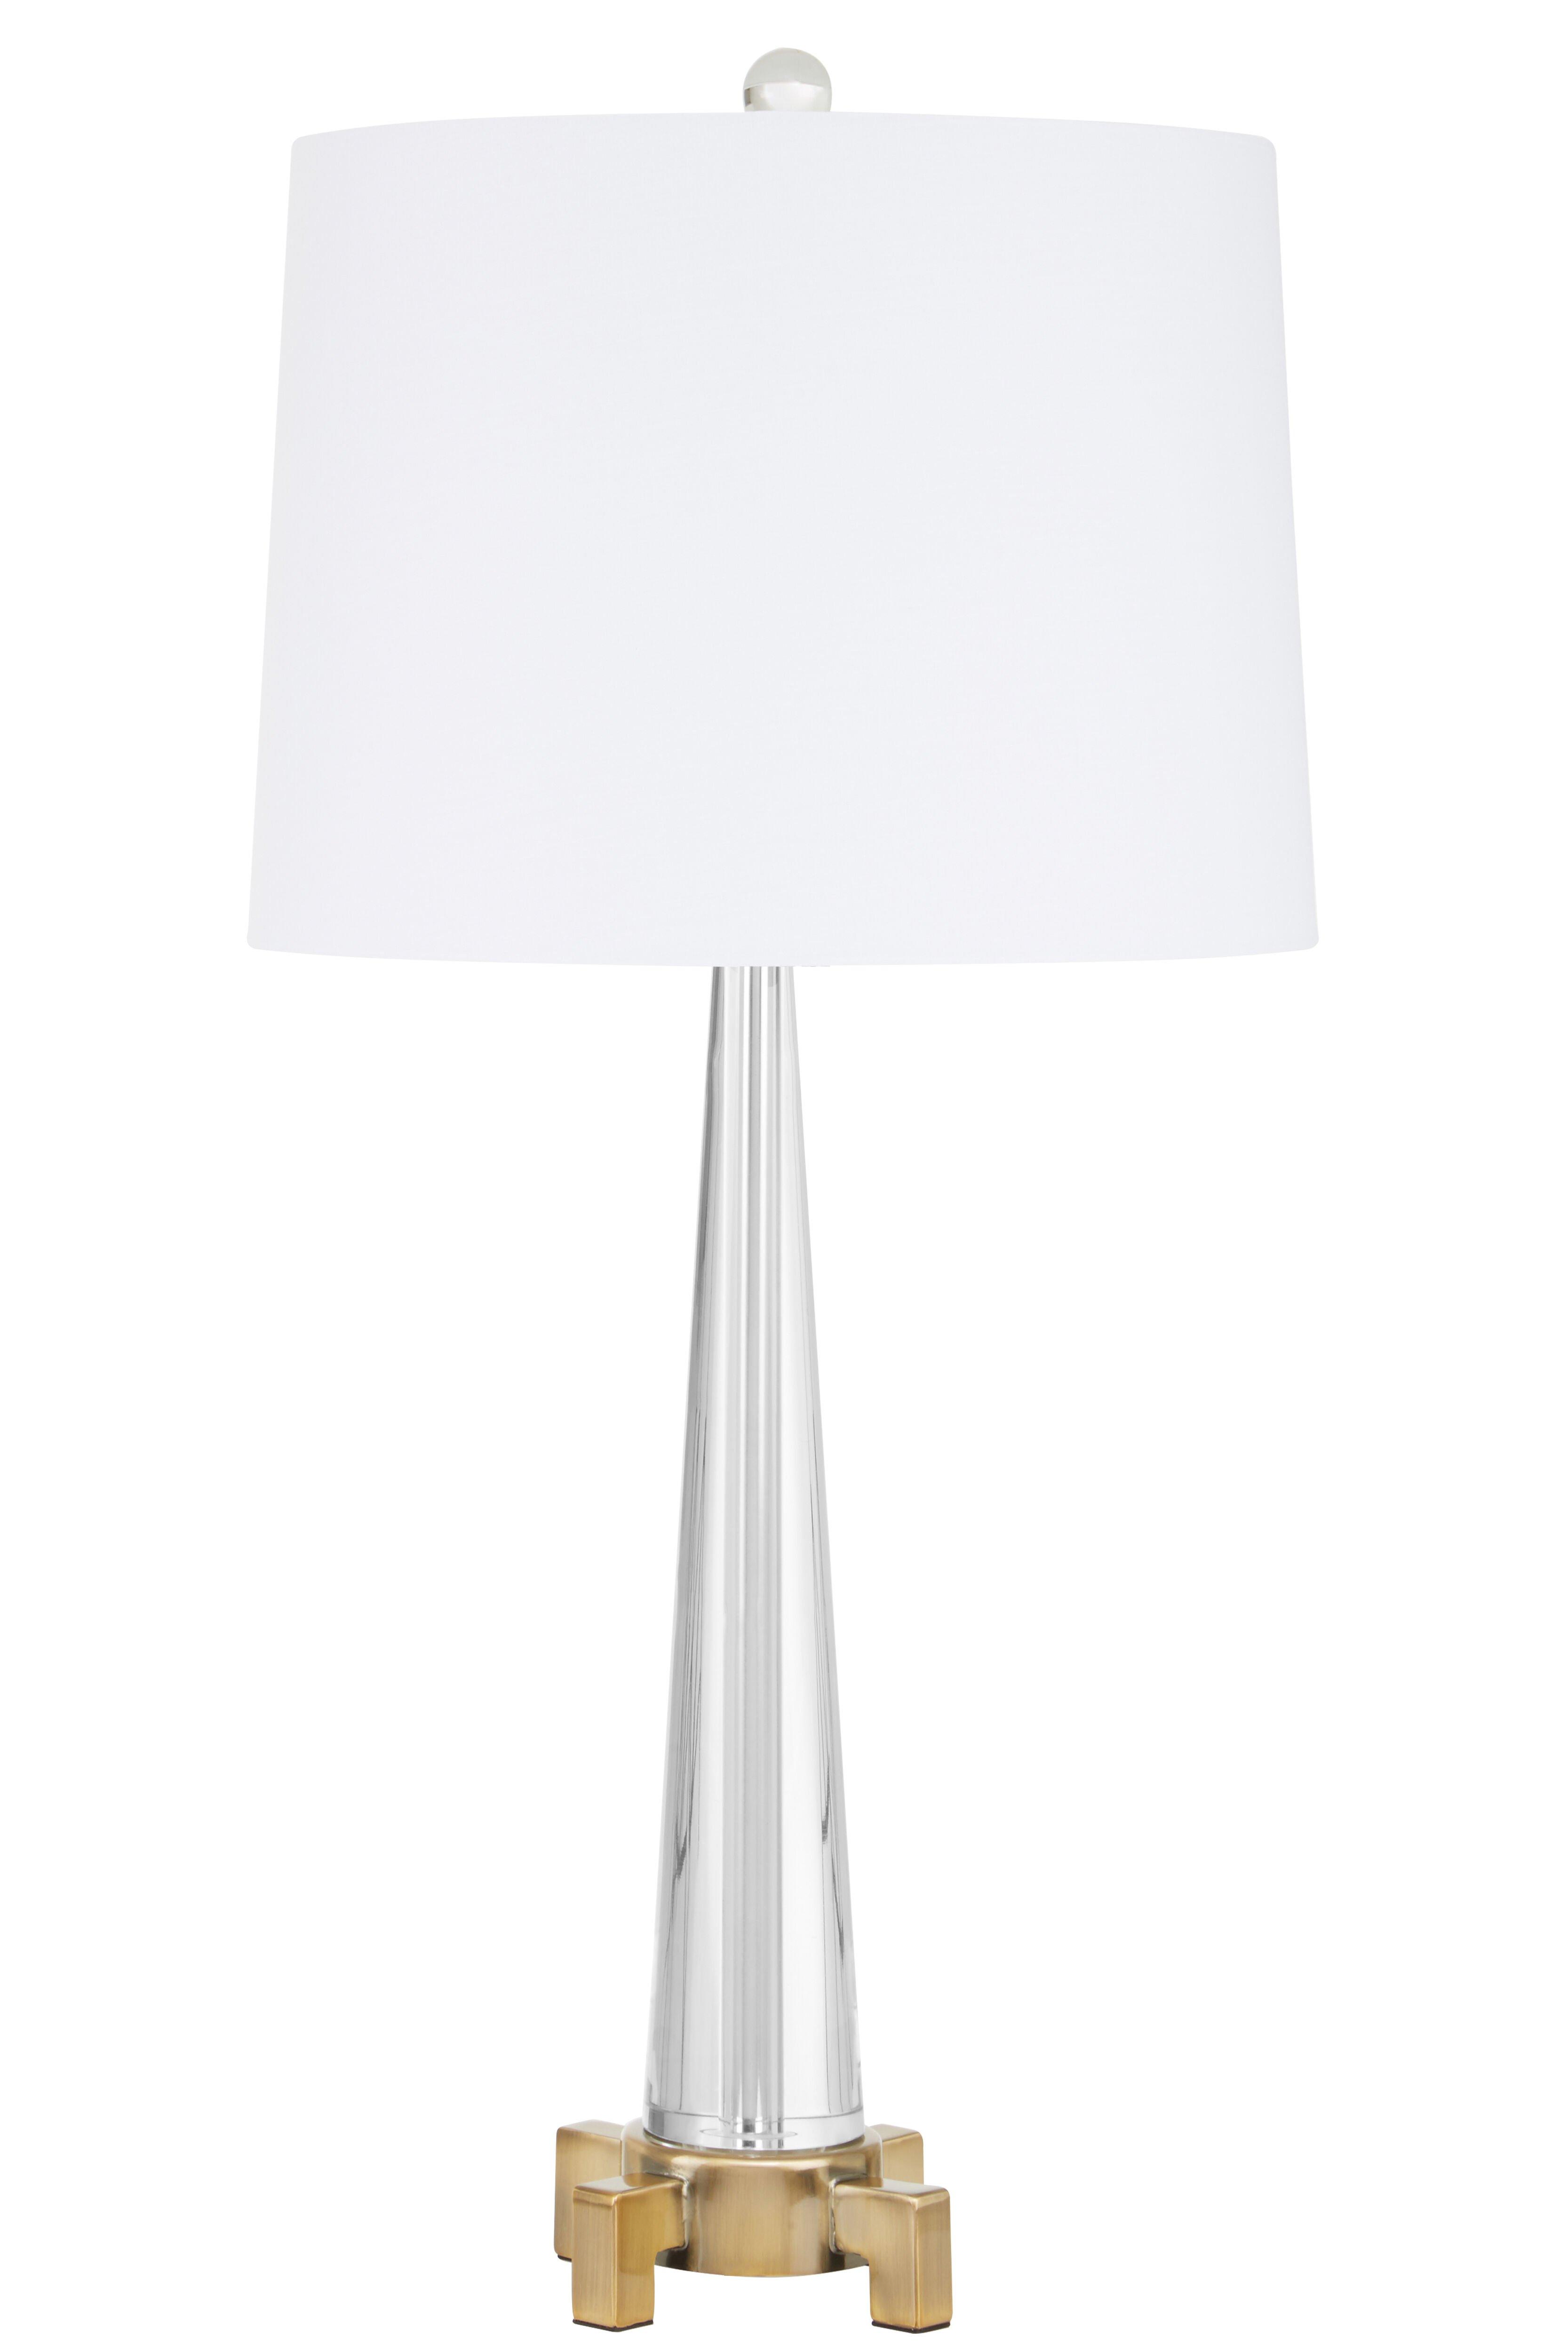 Interiors by Premier Hania Table Lamp